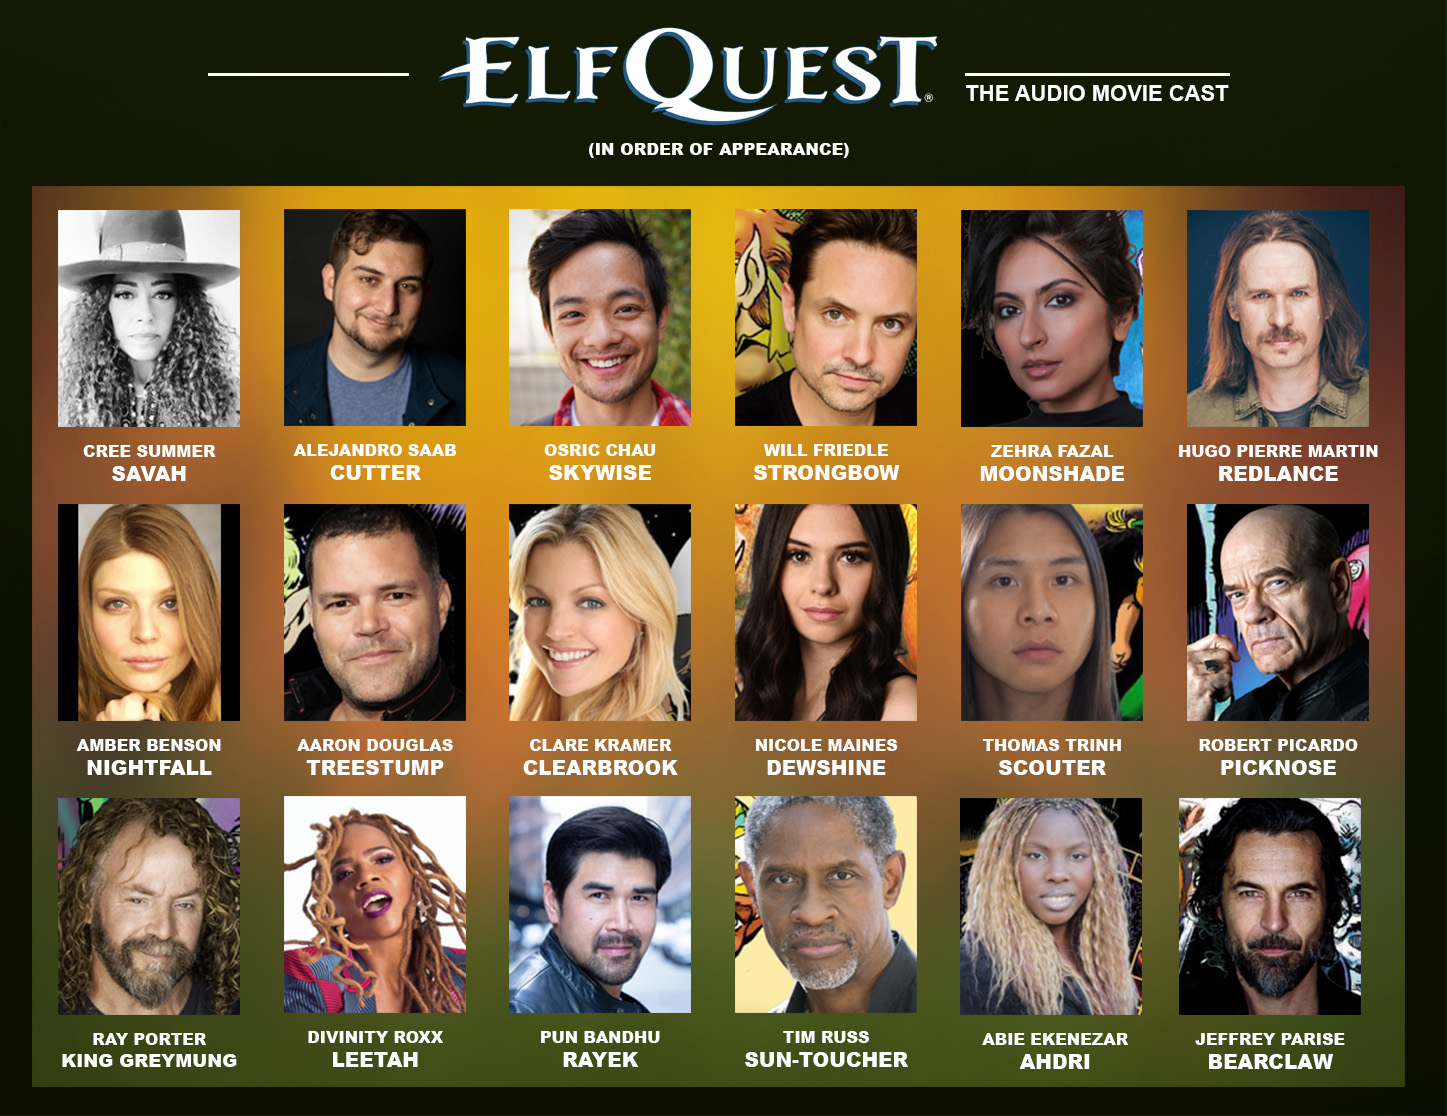 ELFQUEST: THE AUDIO MOVIE brings on fan favs – FIRST COMICS NEWS